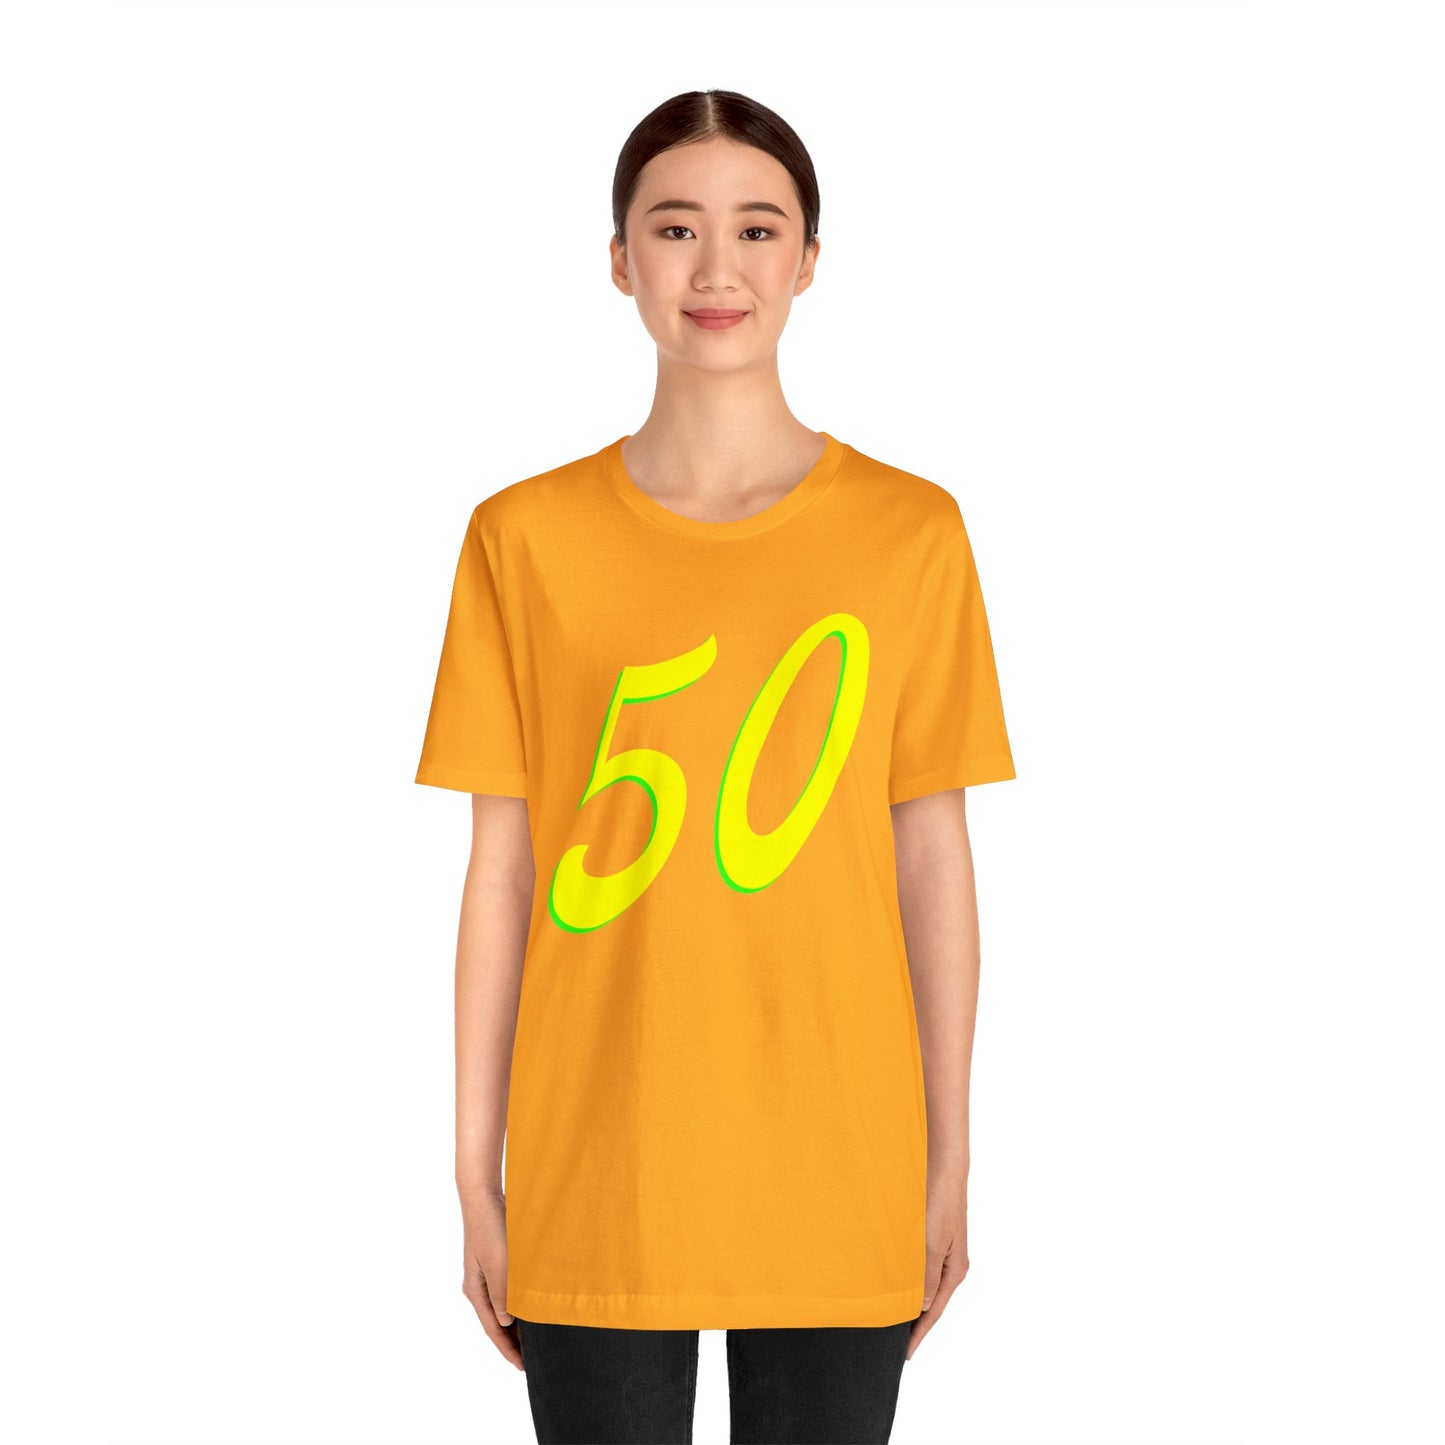 Number 50 Design - Soft Cotton Tee for birthdays and celebrations, Gift for friends and family, Multiple Options by clothezy.com in Asphalt Size Medium - Buy Now